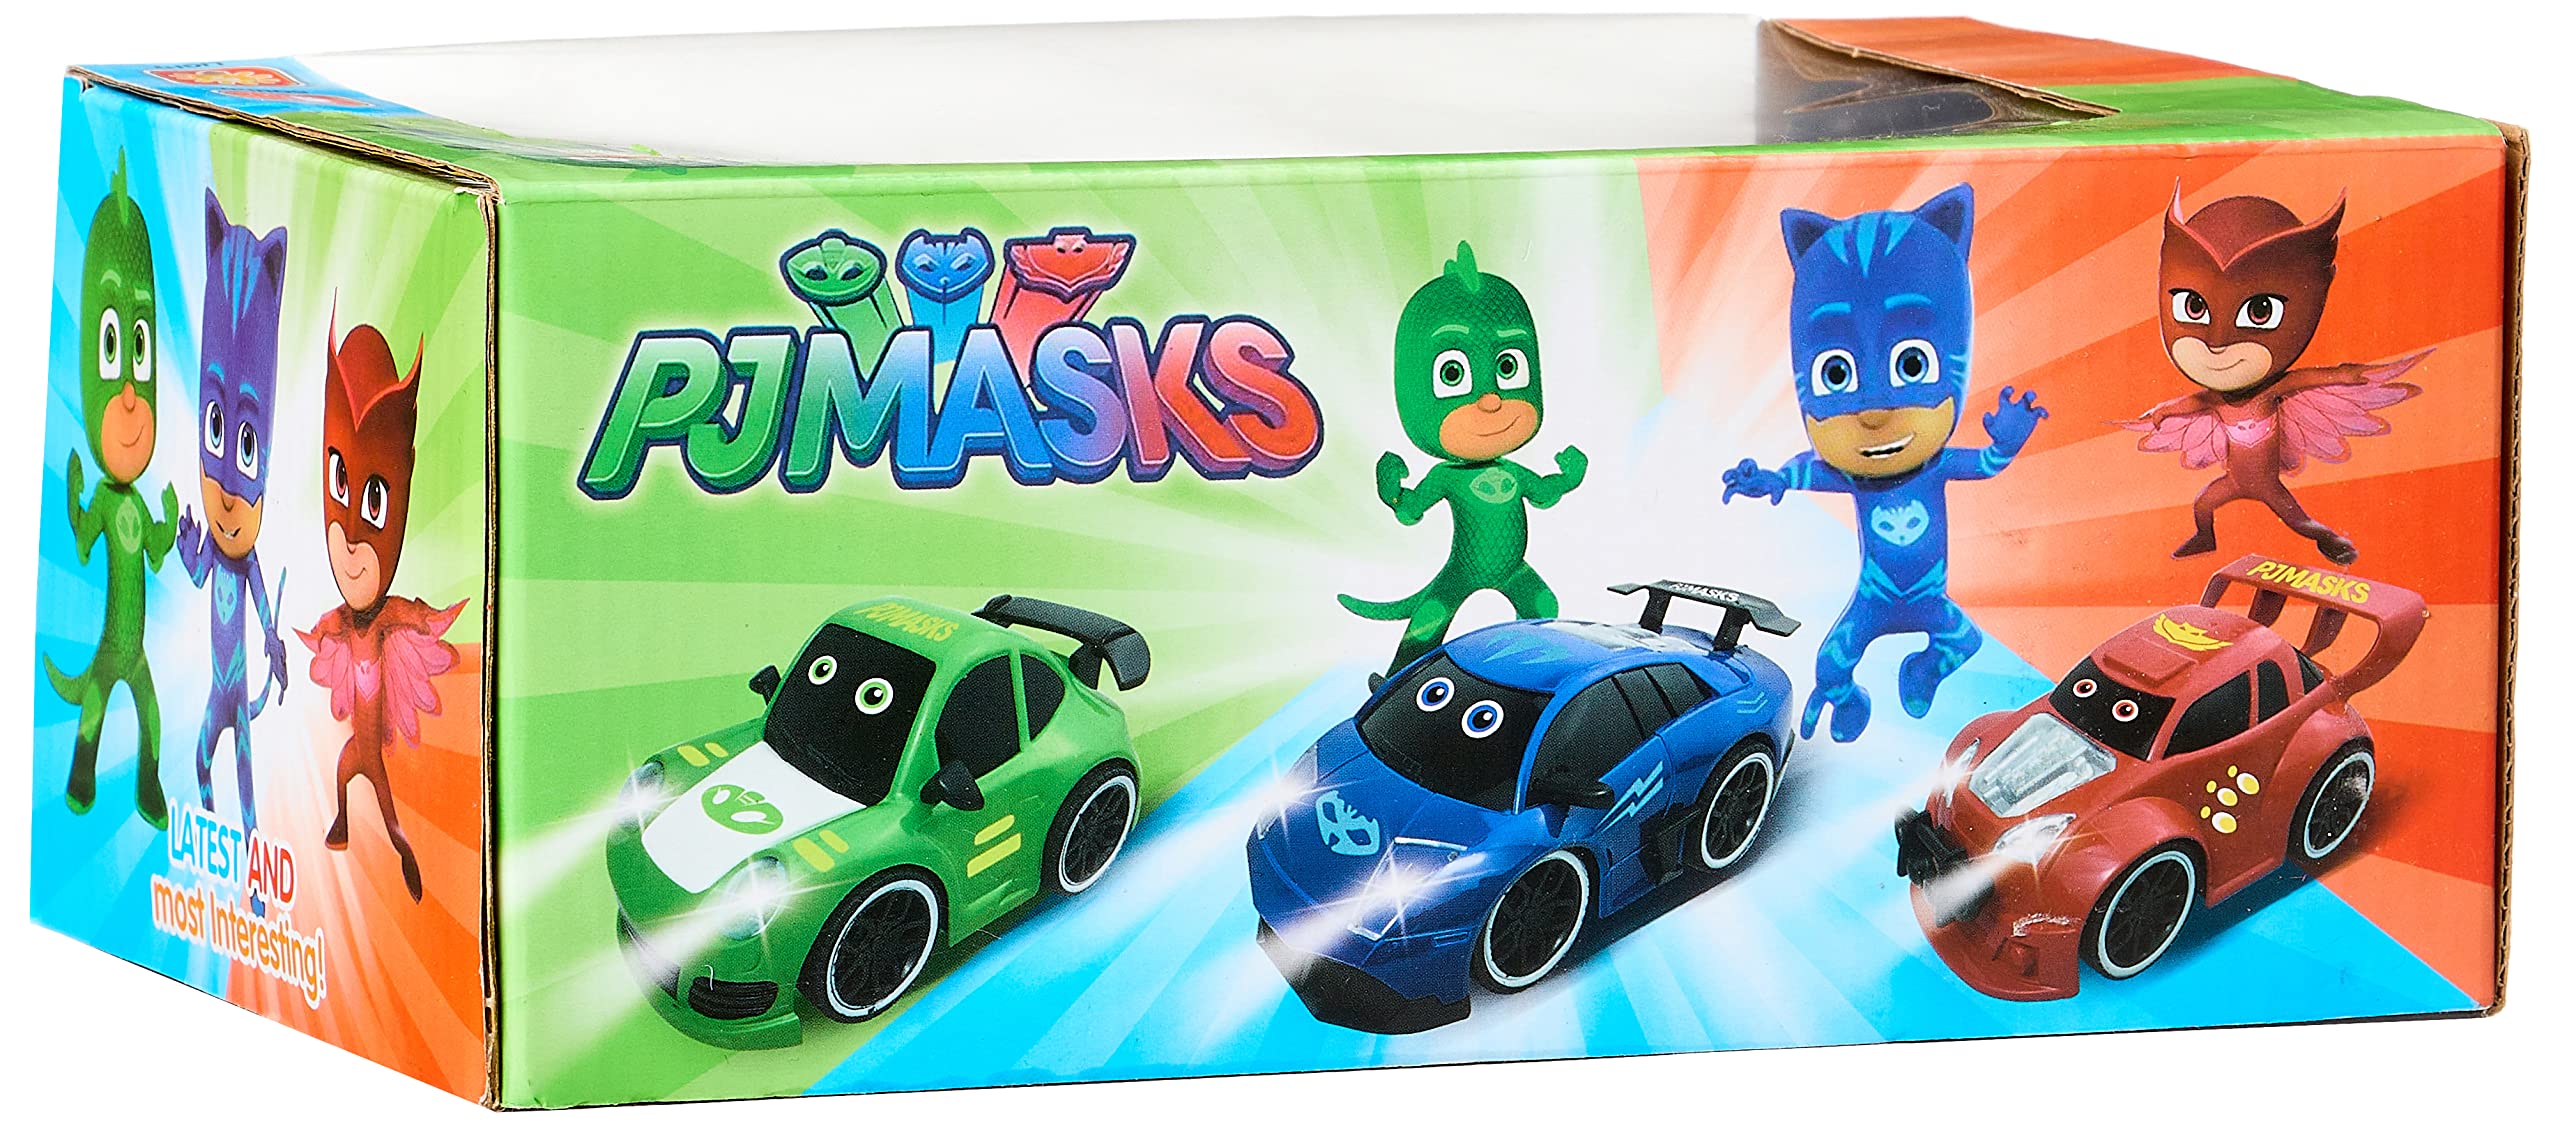 Pj Masks Conner Car With Remote Controller - Green